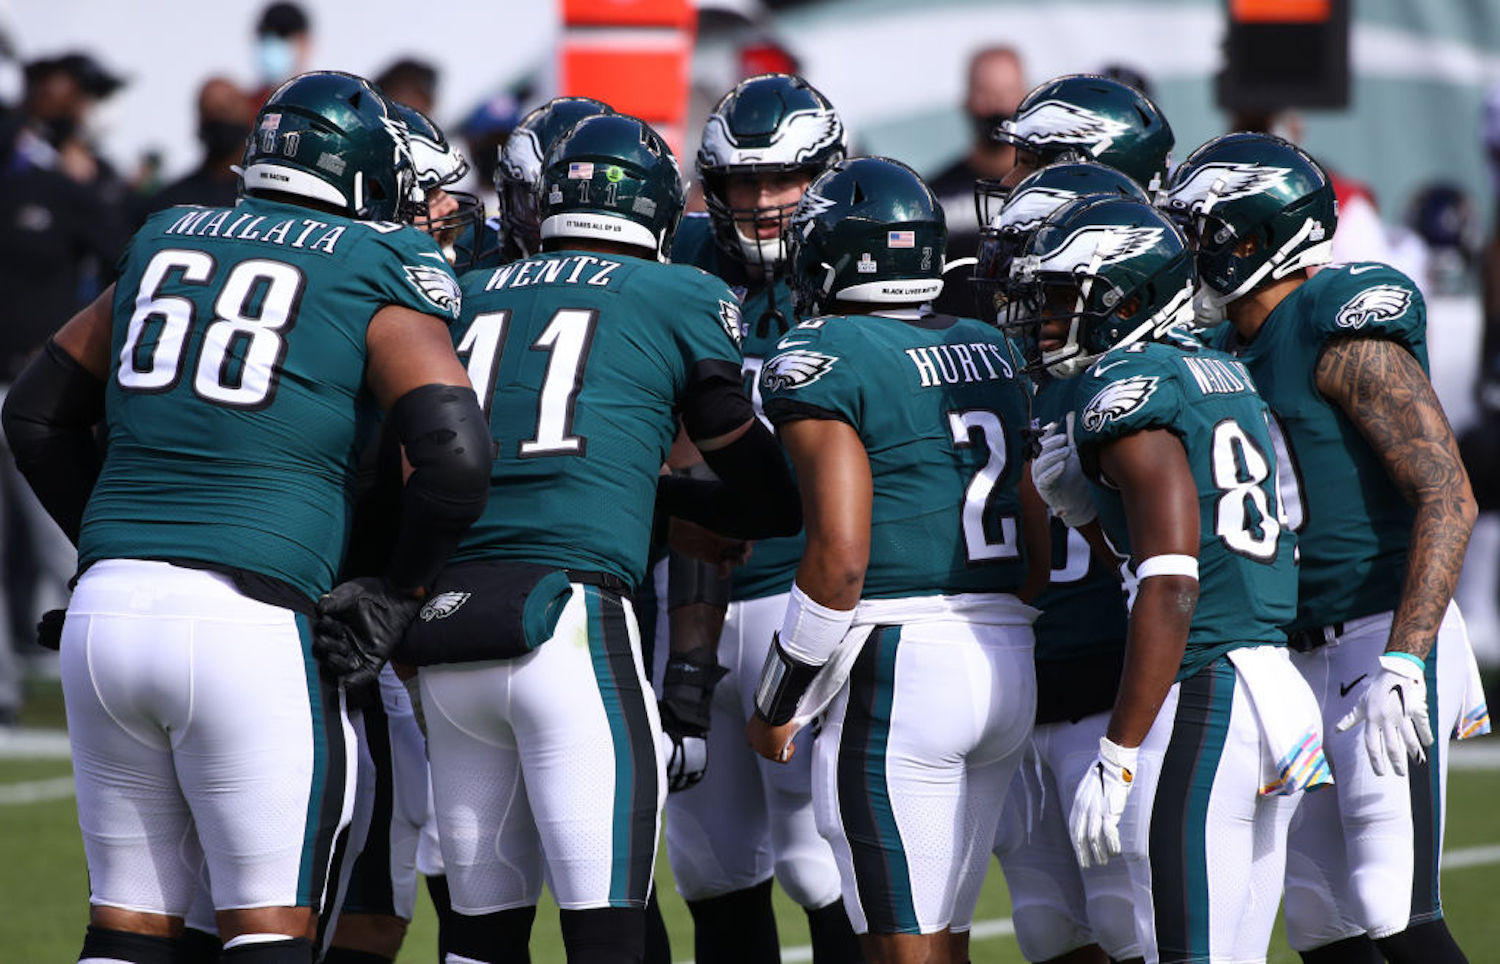 The Philadelphia Eagles have been crushed by injuries in 2020, but they just got two crucial pieces to their offense back on Monday.